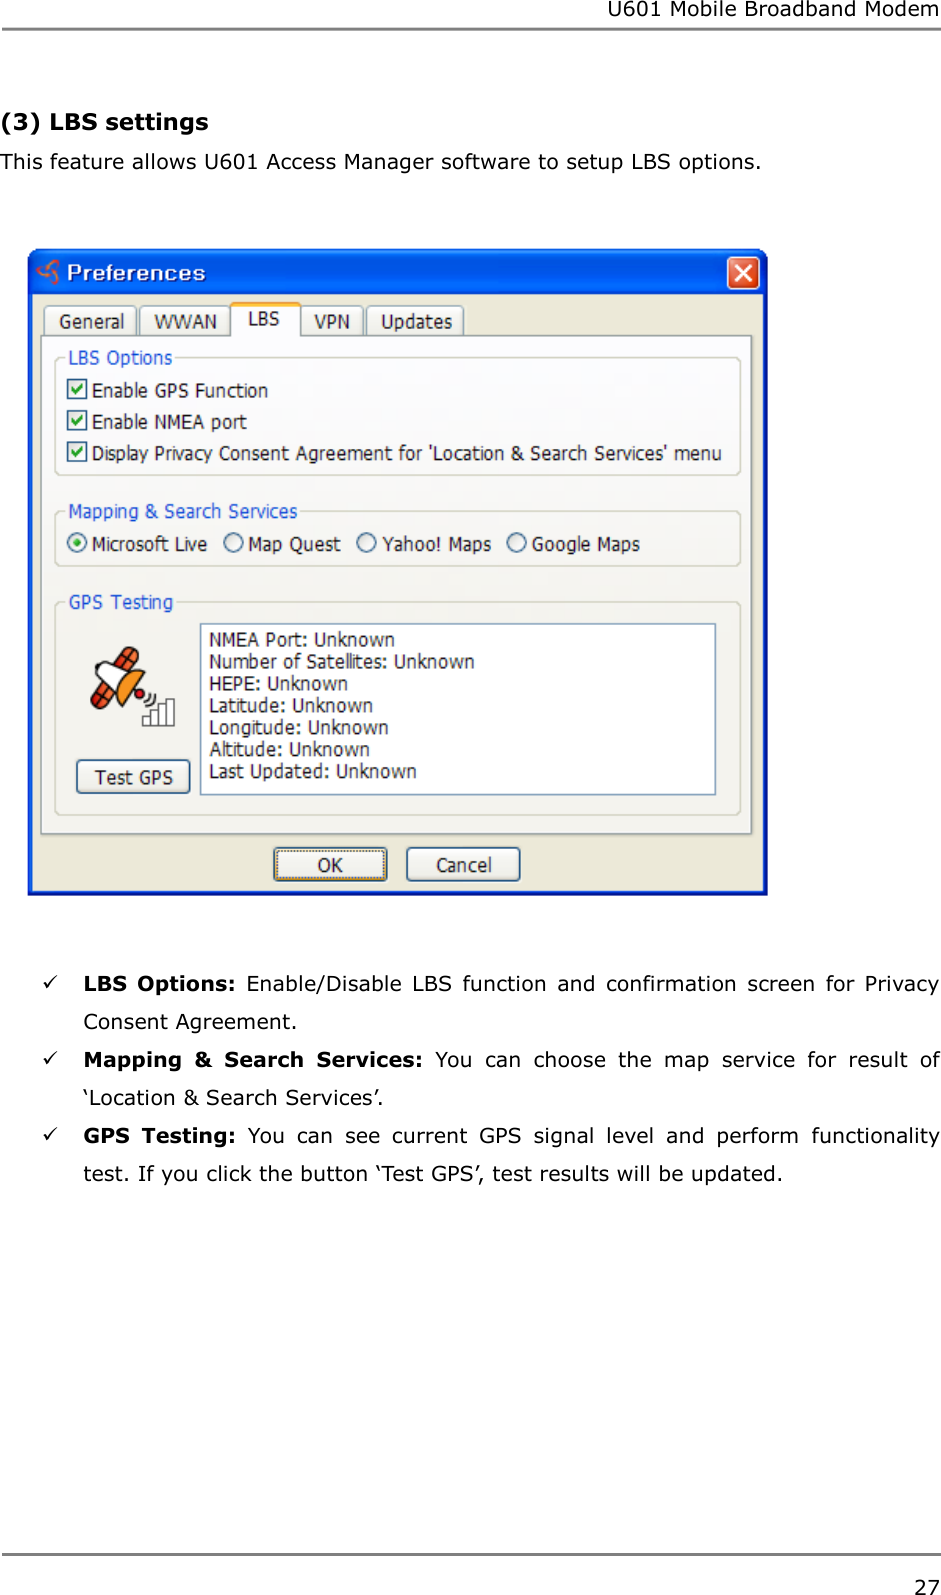 U601 Mobile Broadband Modem 27  (3) LBS settings This feature allows U601 Access Manager software to setup LBS options.     LBS  Options:  Enable/Disable  LBS  function  and  confirmation  screen  for  Privacy Consent Agreement.  Mapping  &amp;  Search  Services:  You  can  choose  the  map  service  for  result  of „Location &amp; Search Services‟.  GPS  Testing:  You  can  see  current  GPS  signal  level  and  perform  functionality test. If you click the button „Test GPS‟, test results will be updated.      